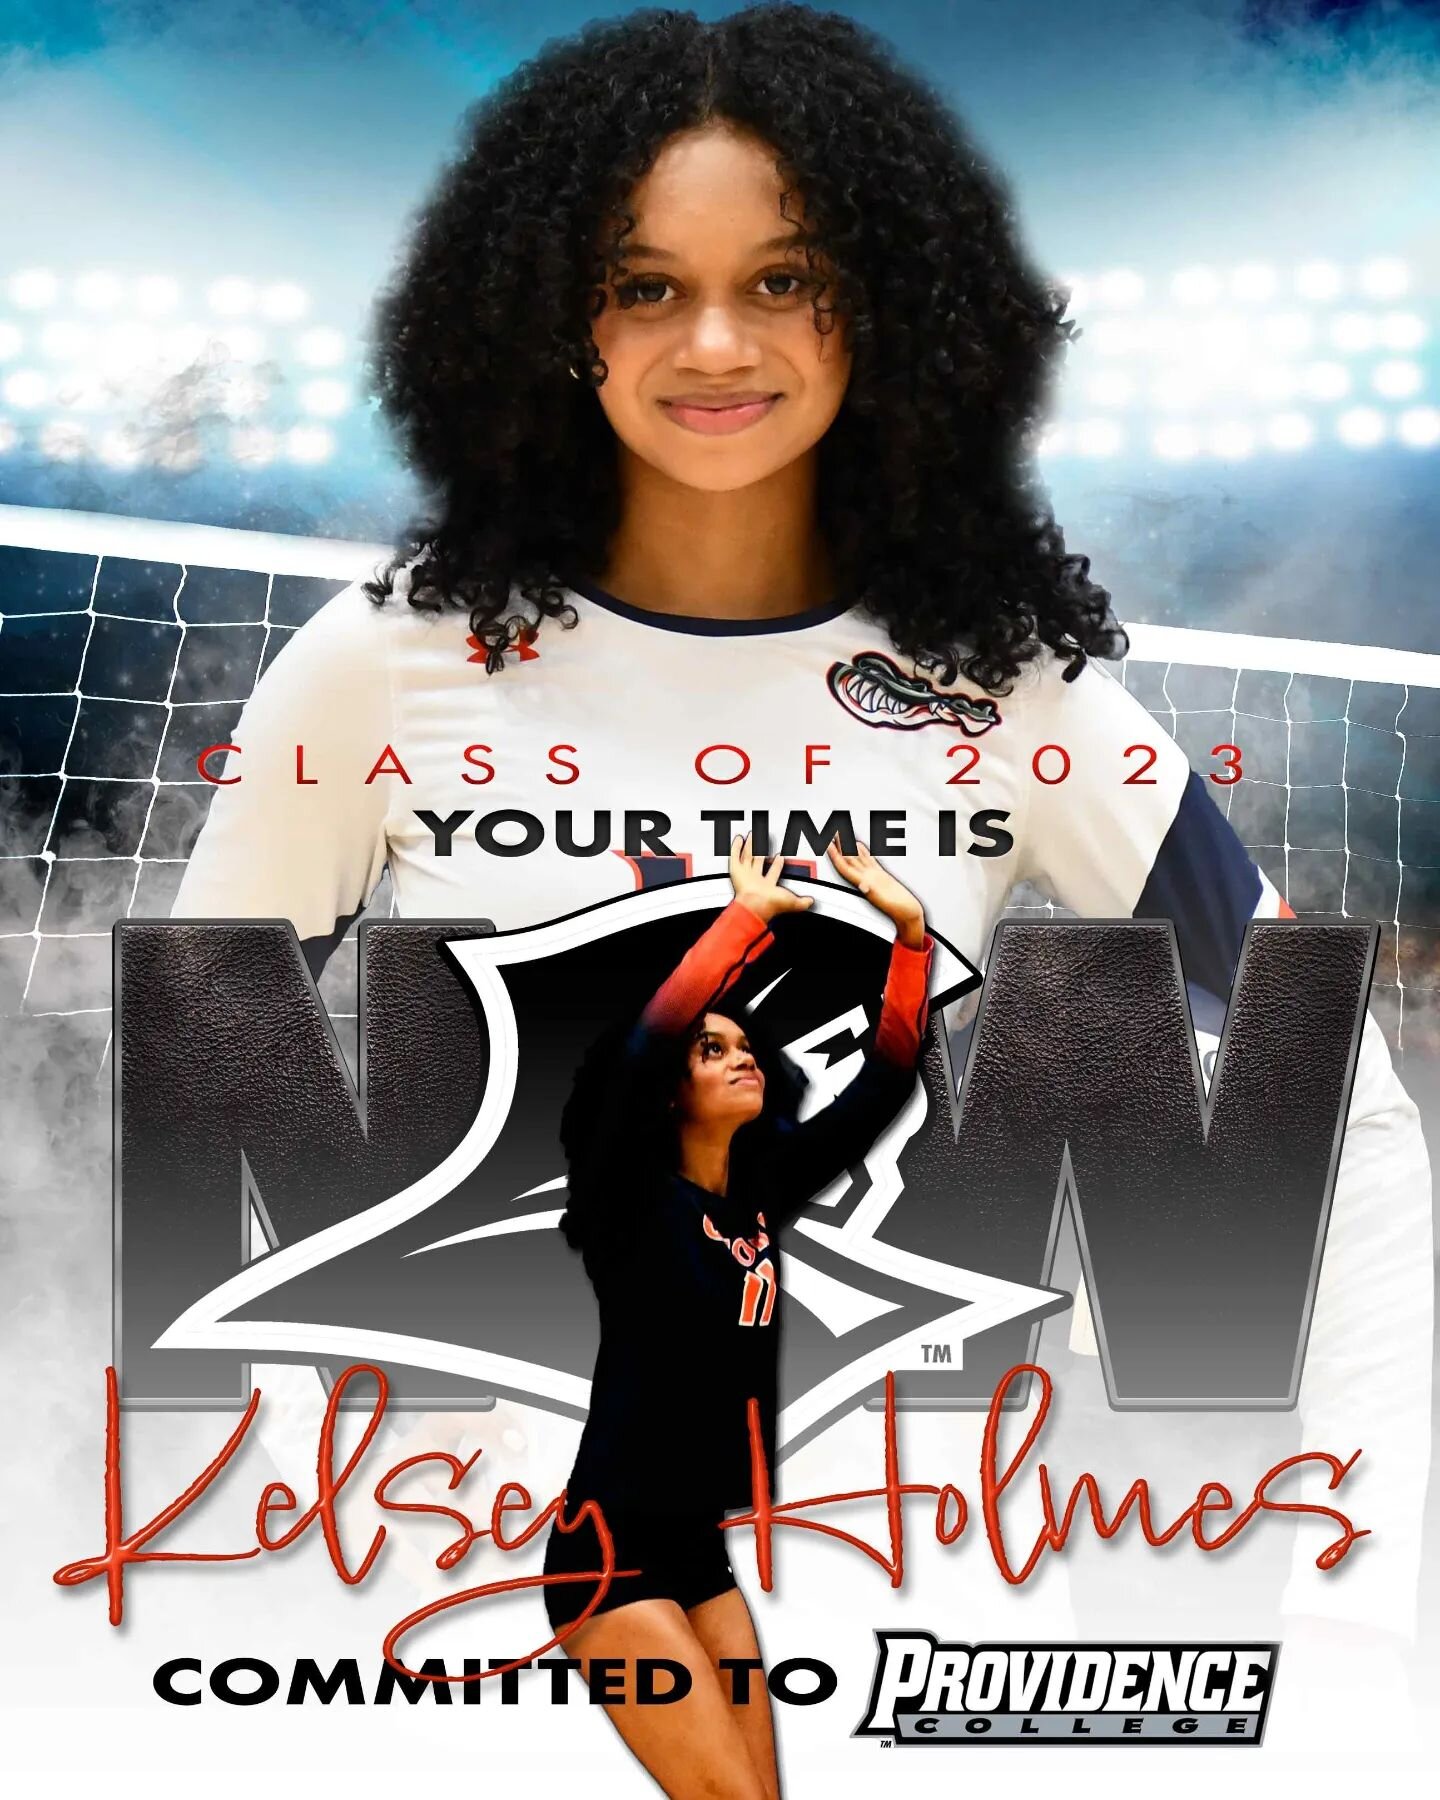 College recruiting season!!! We're proud to have created something for these amazing ladies. 

#youretimeisnow #recruits #recruiting #recruitment #sports #college #athlete #toprecruits #recruit #readyforthestage #collegeathletes #stageathlete #highsc